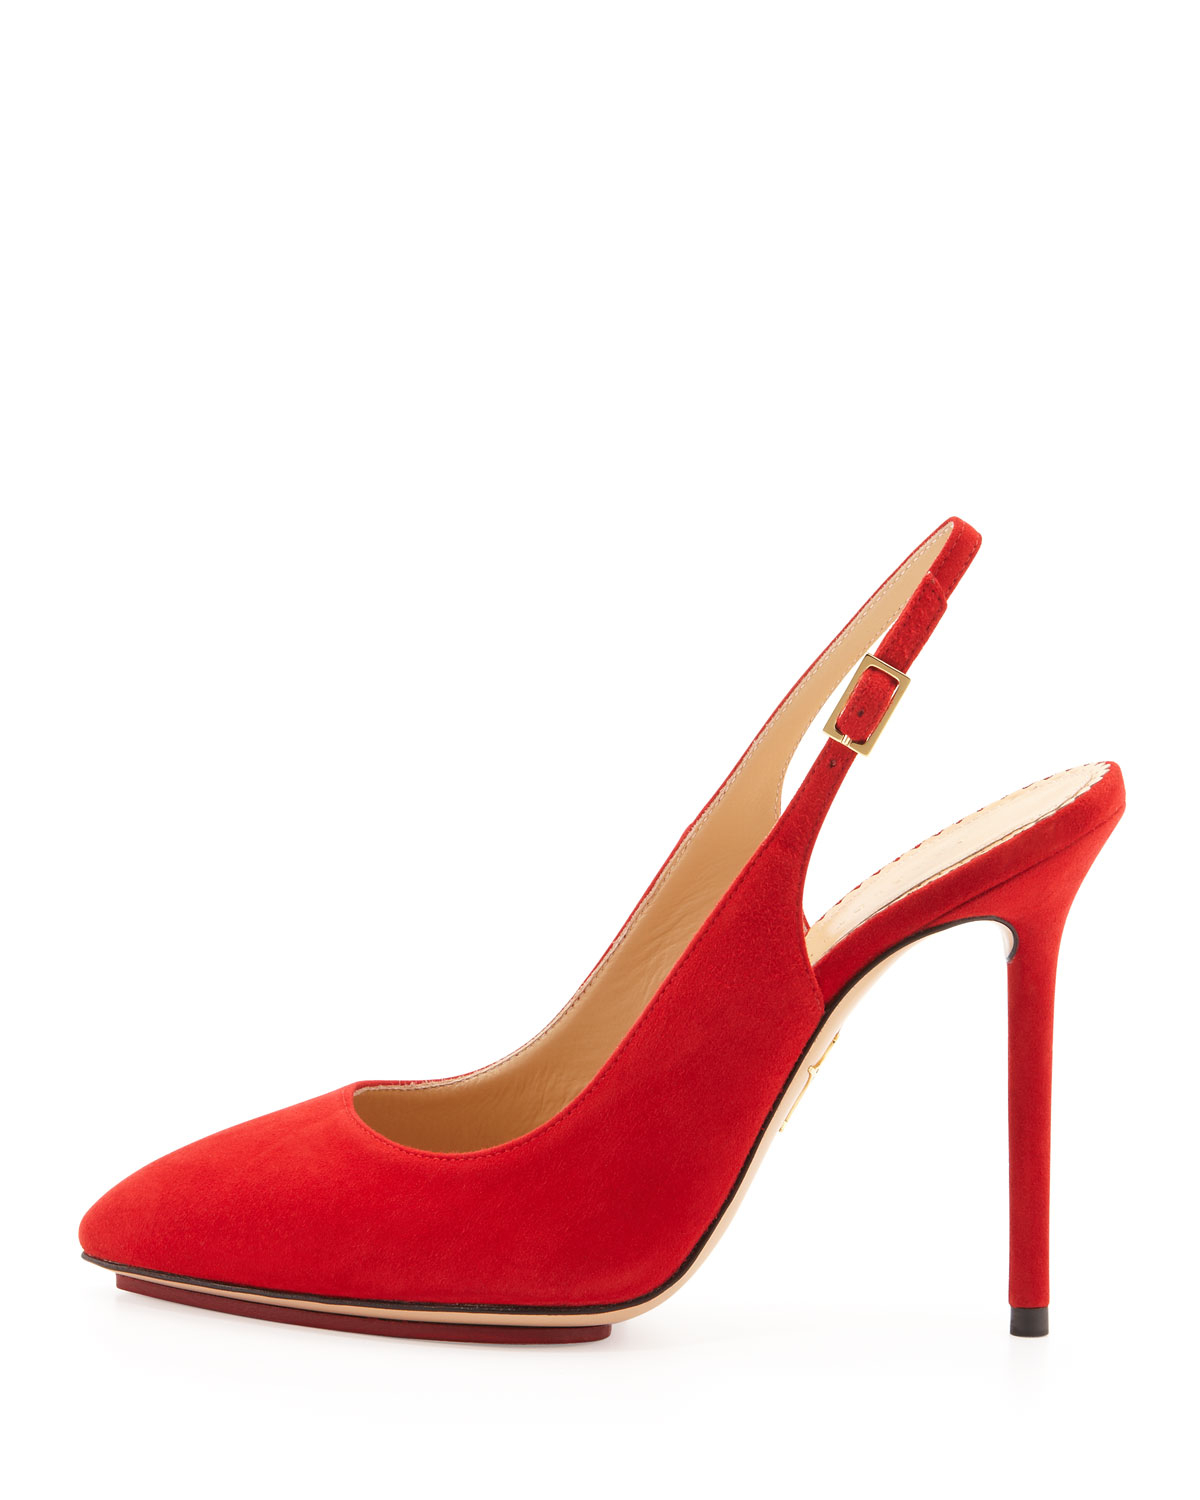 Lyst - Charlotte Olympia Monroe Suede Slingback Pump in Red